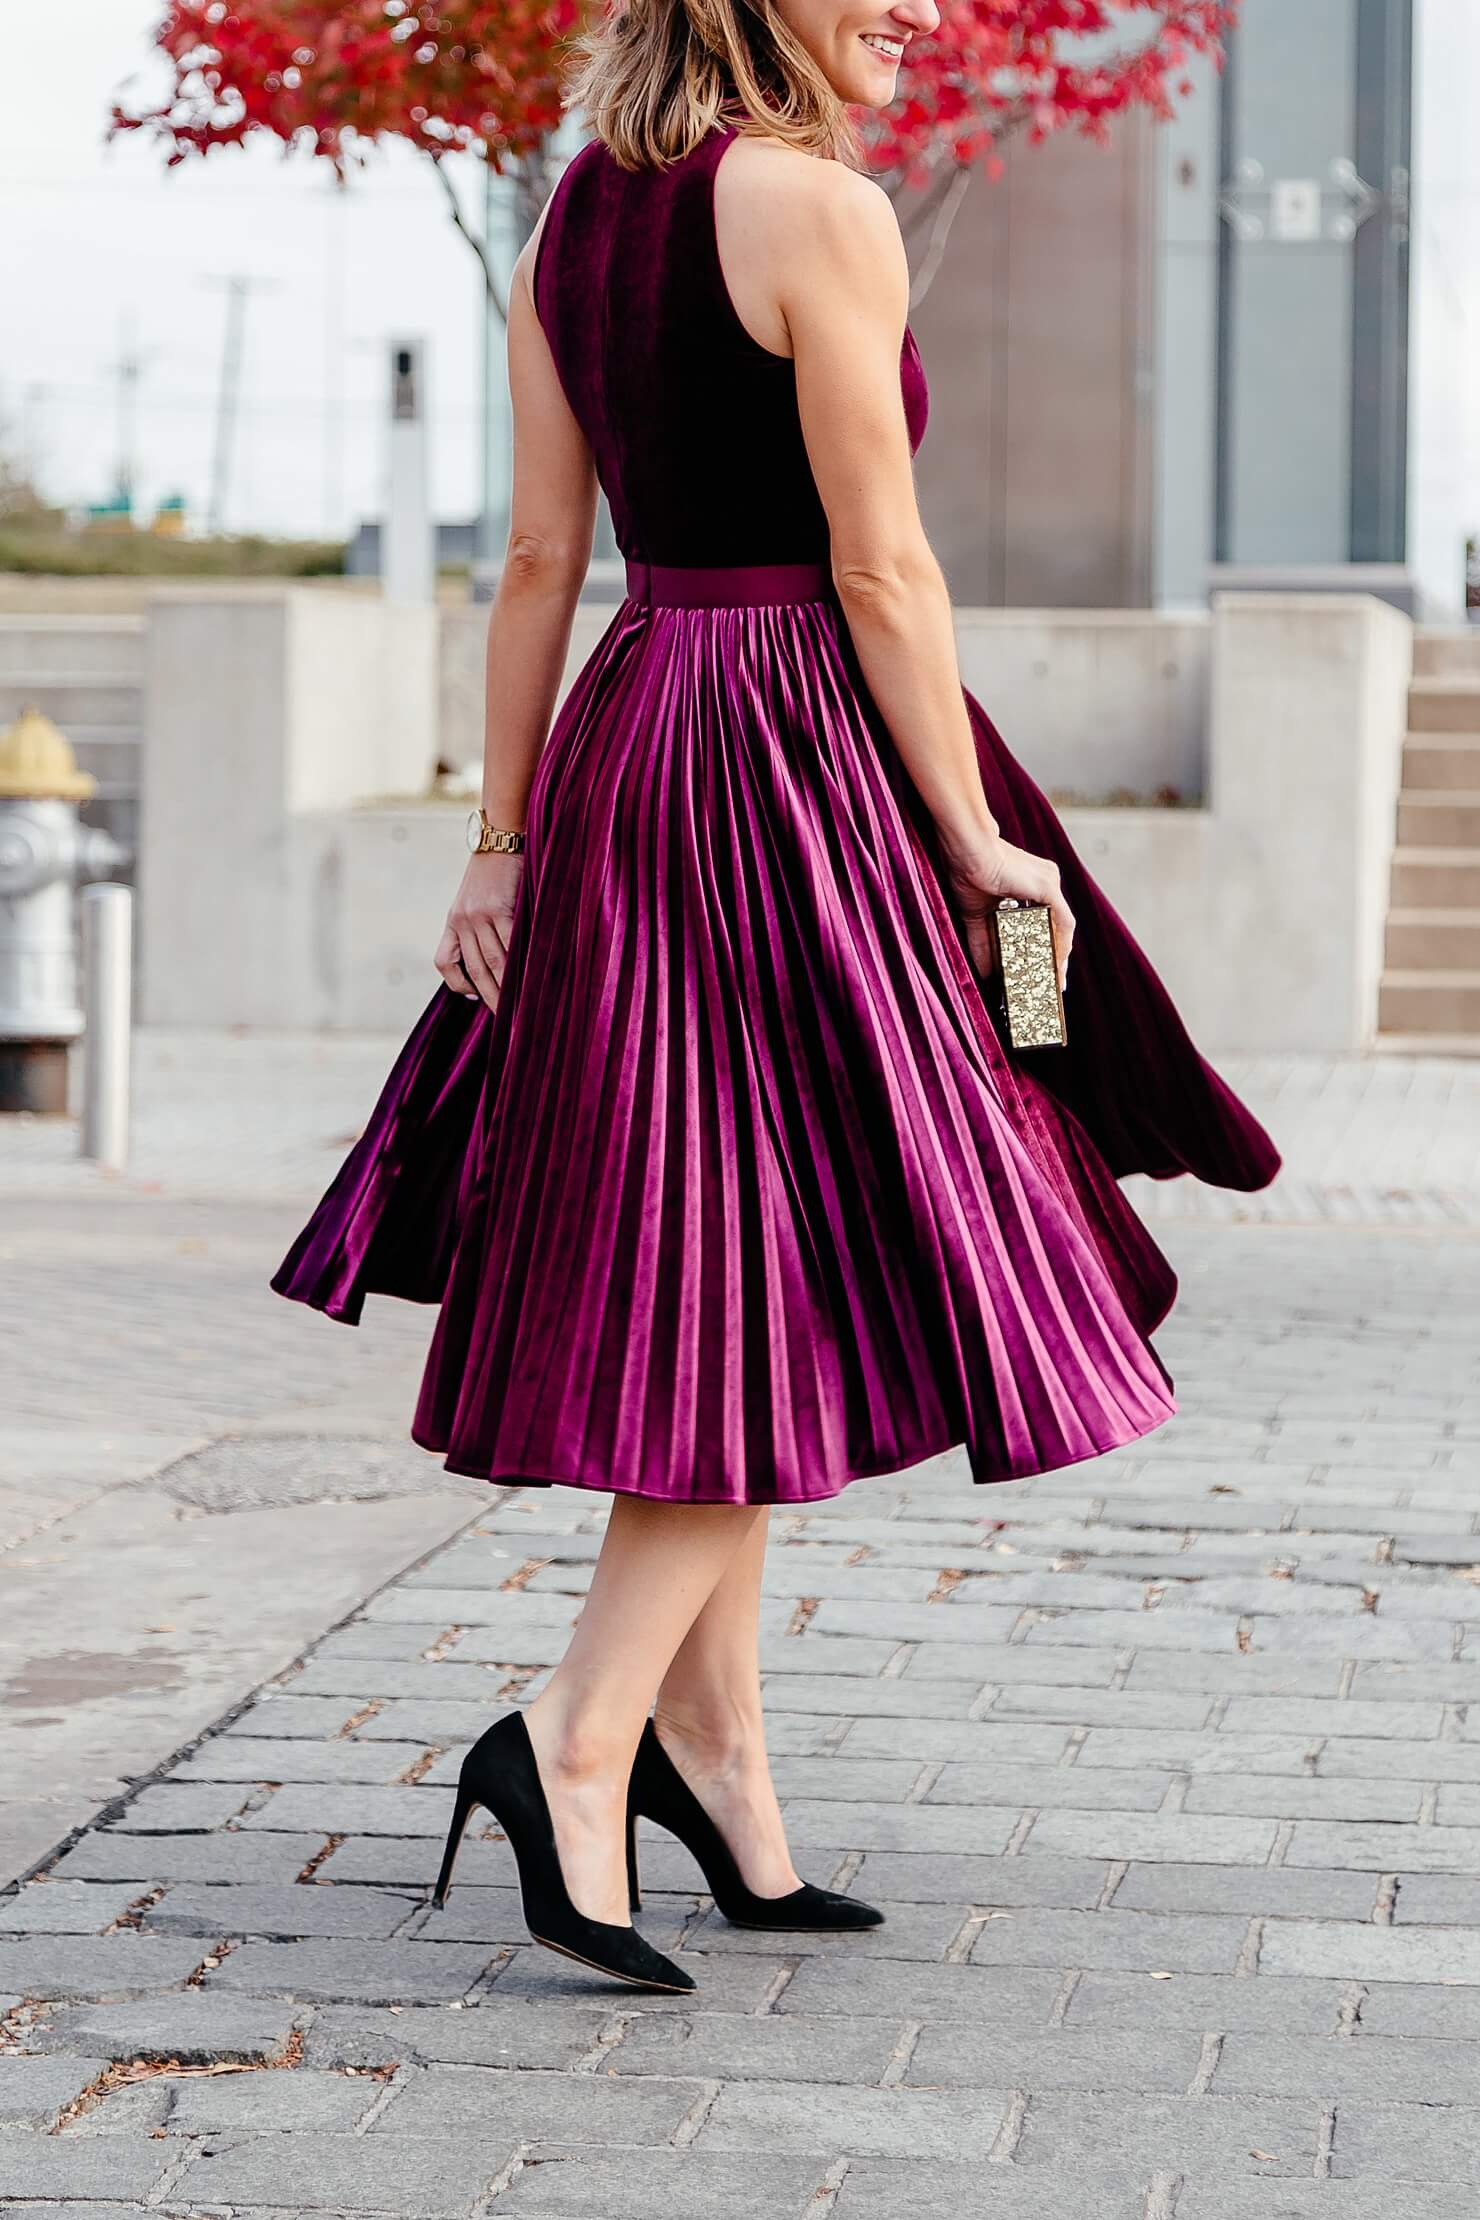 ted baker velvet pleated dress with clutch, new years outfit idea 